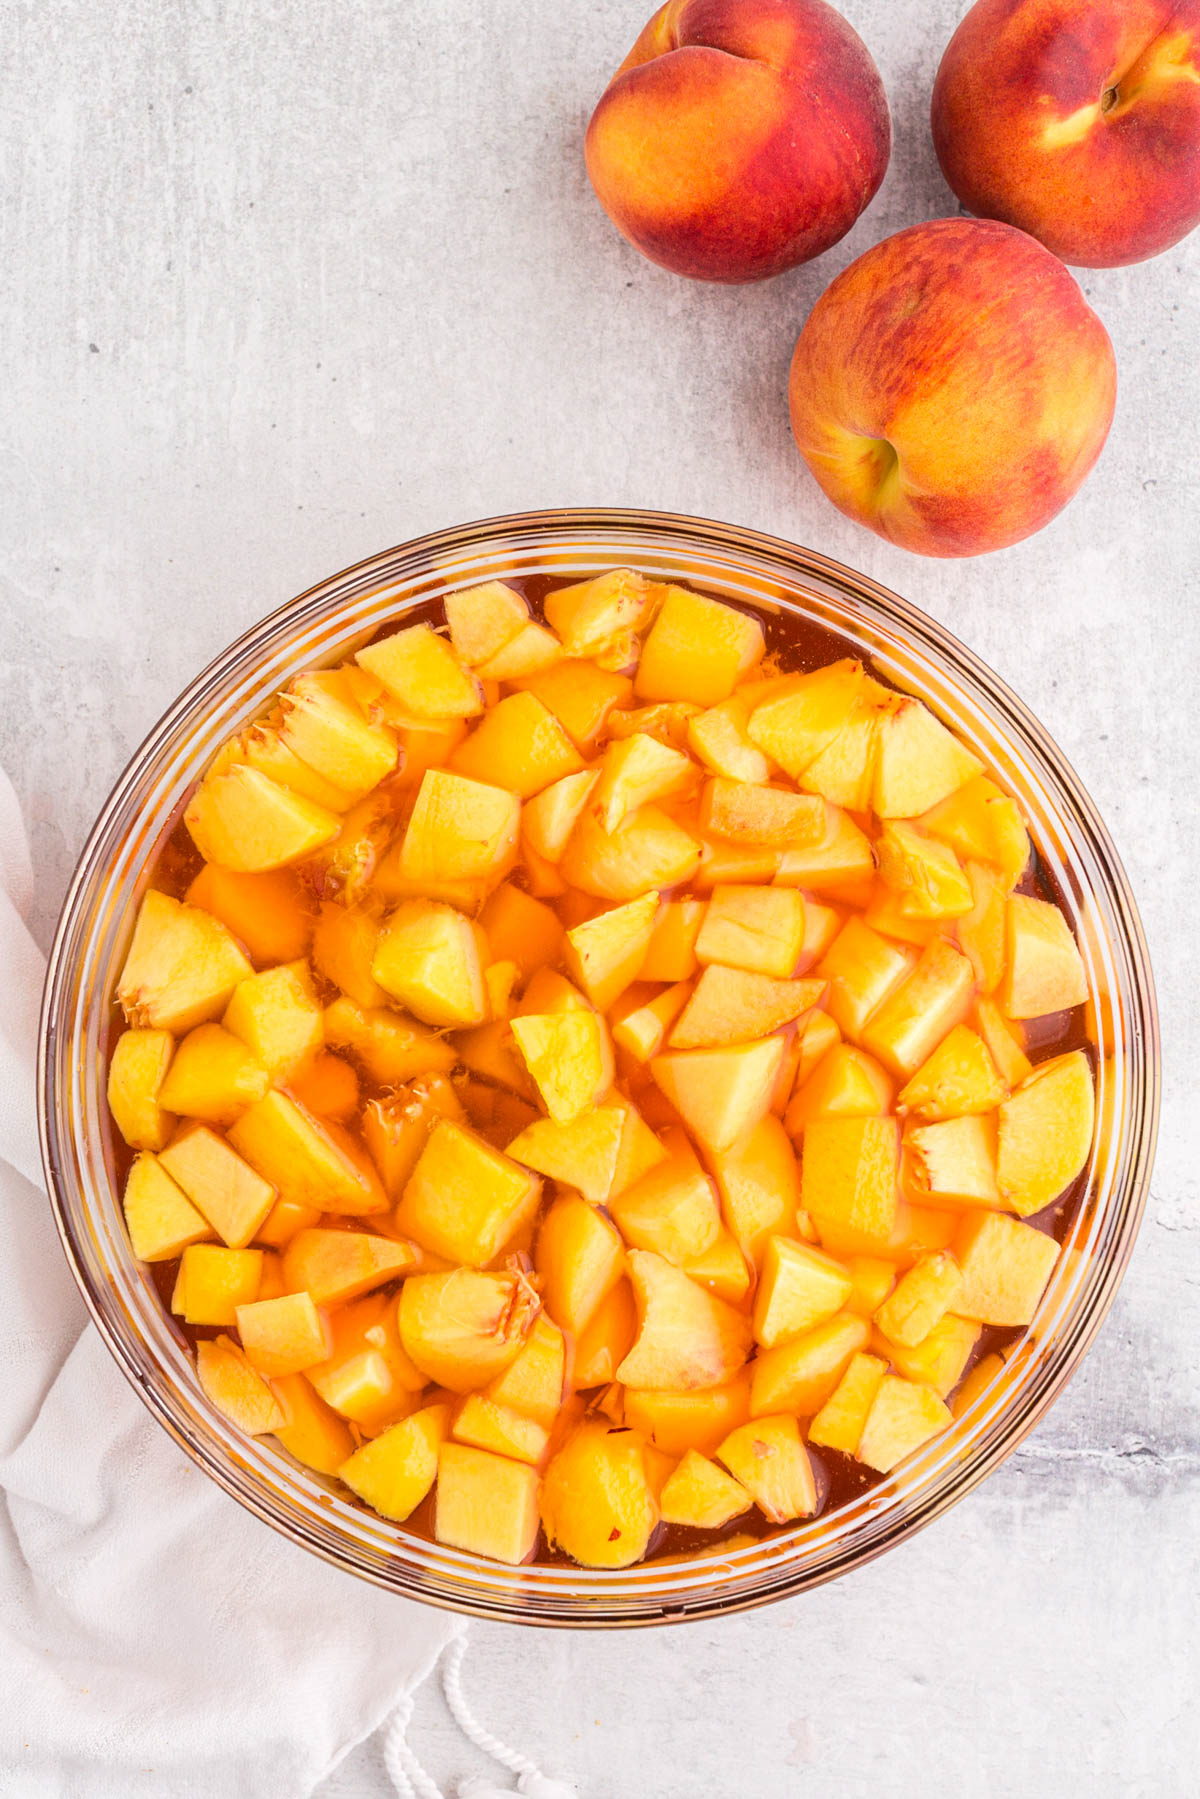 Bowl of dissolved and set Jell-O with pieces of peaches, whole peaches, white linen, on a marble countertop.